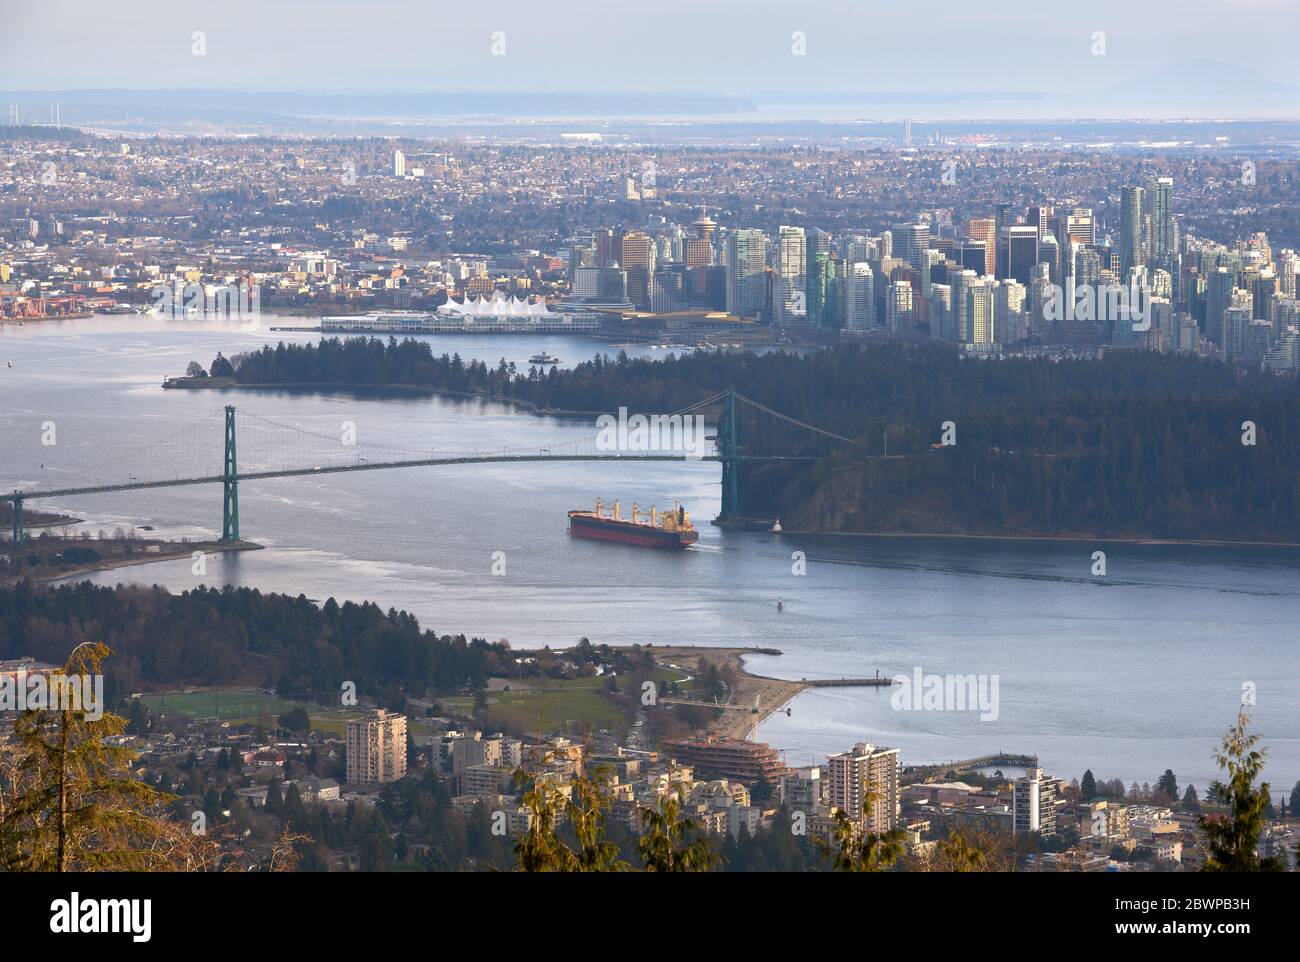 Vancouver Burrard Inlet Freighter and Cityscape. The view looking down over Burrard Inlet and downtown Vancouver. Stock Photo